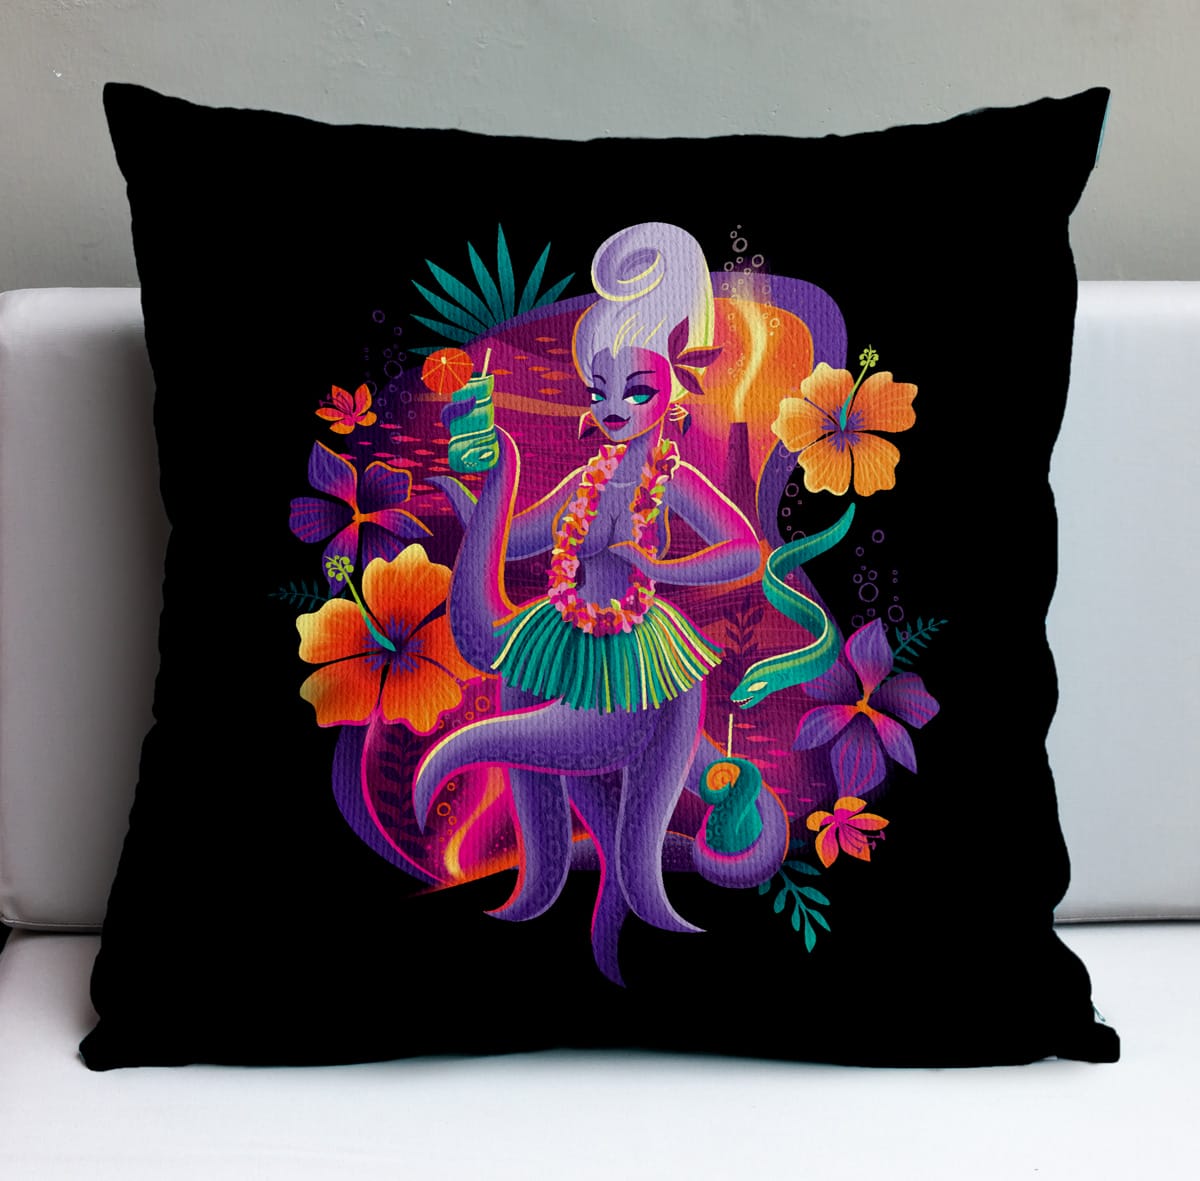 Mistress of the Deep Pillow Cover